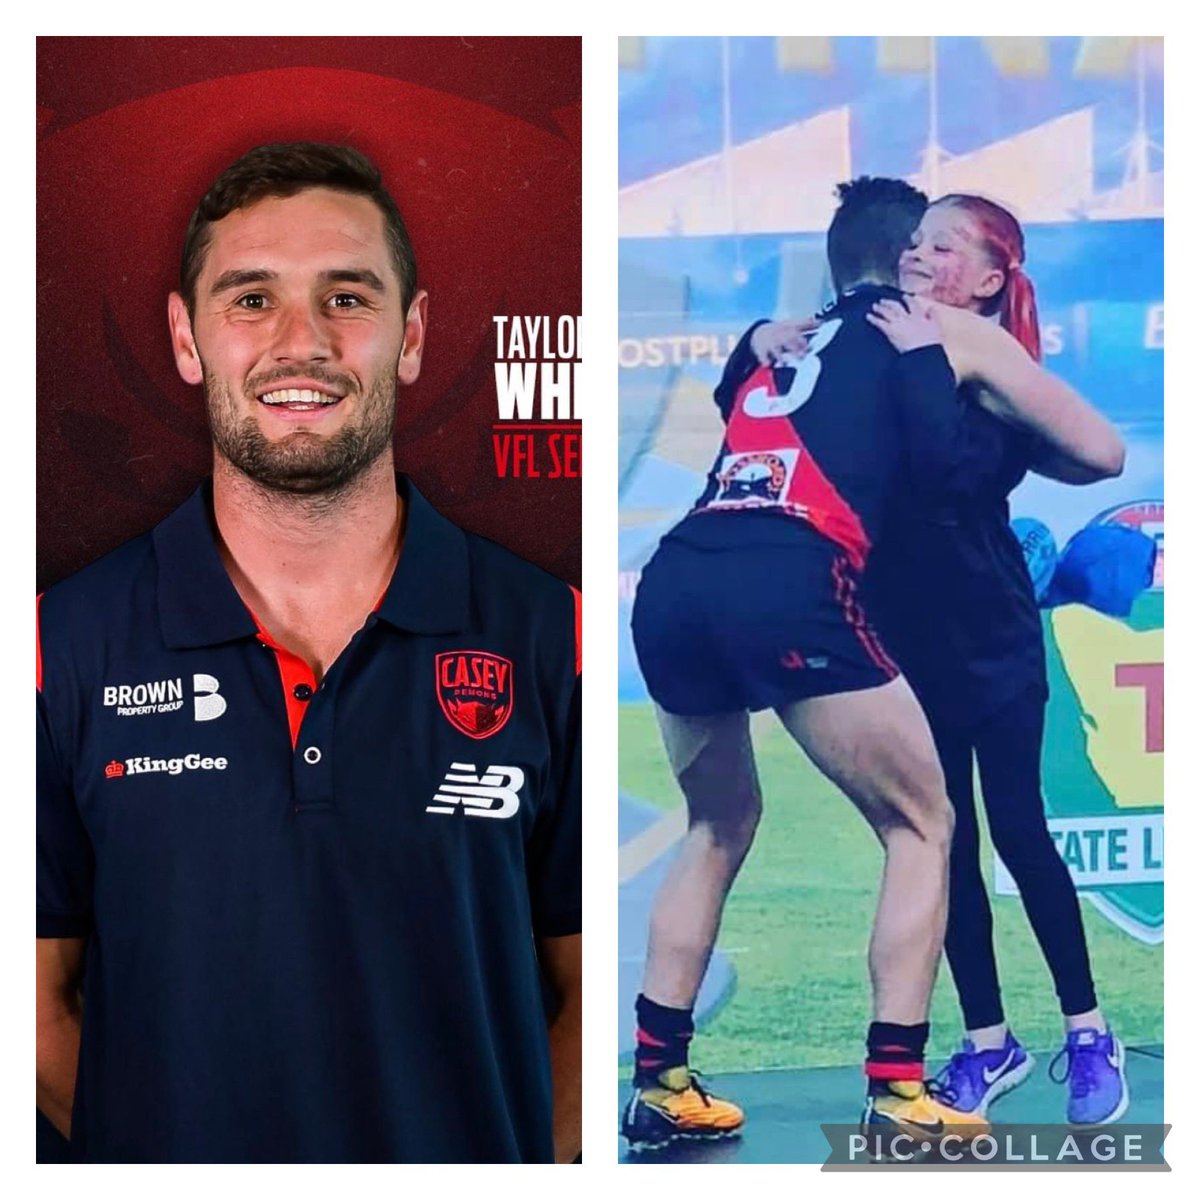 Well done lad , super player and now your hard work aspiring to be best coach you can has taken you to coach a VFL side @CaseyDemonsFC .. all the best @twhitford3 #vfl #no3